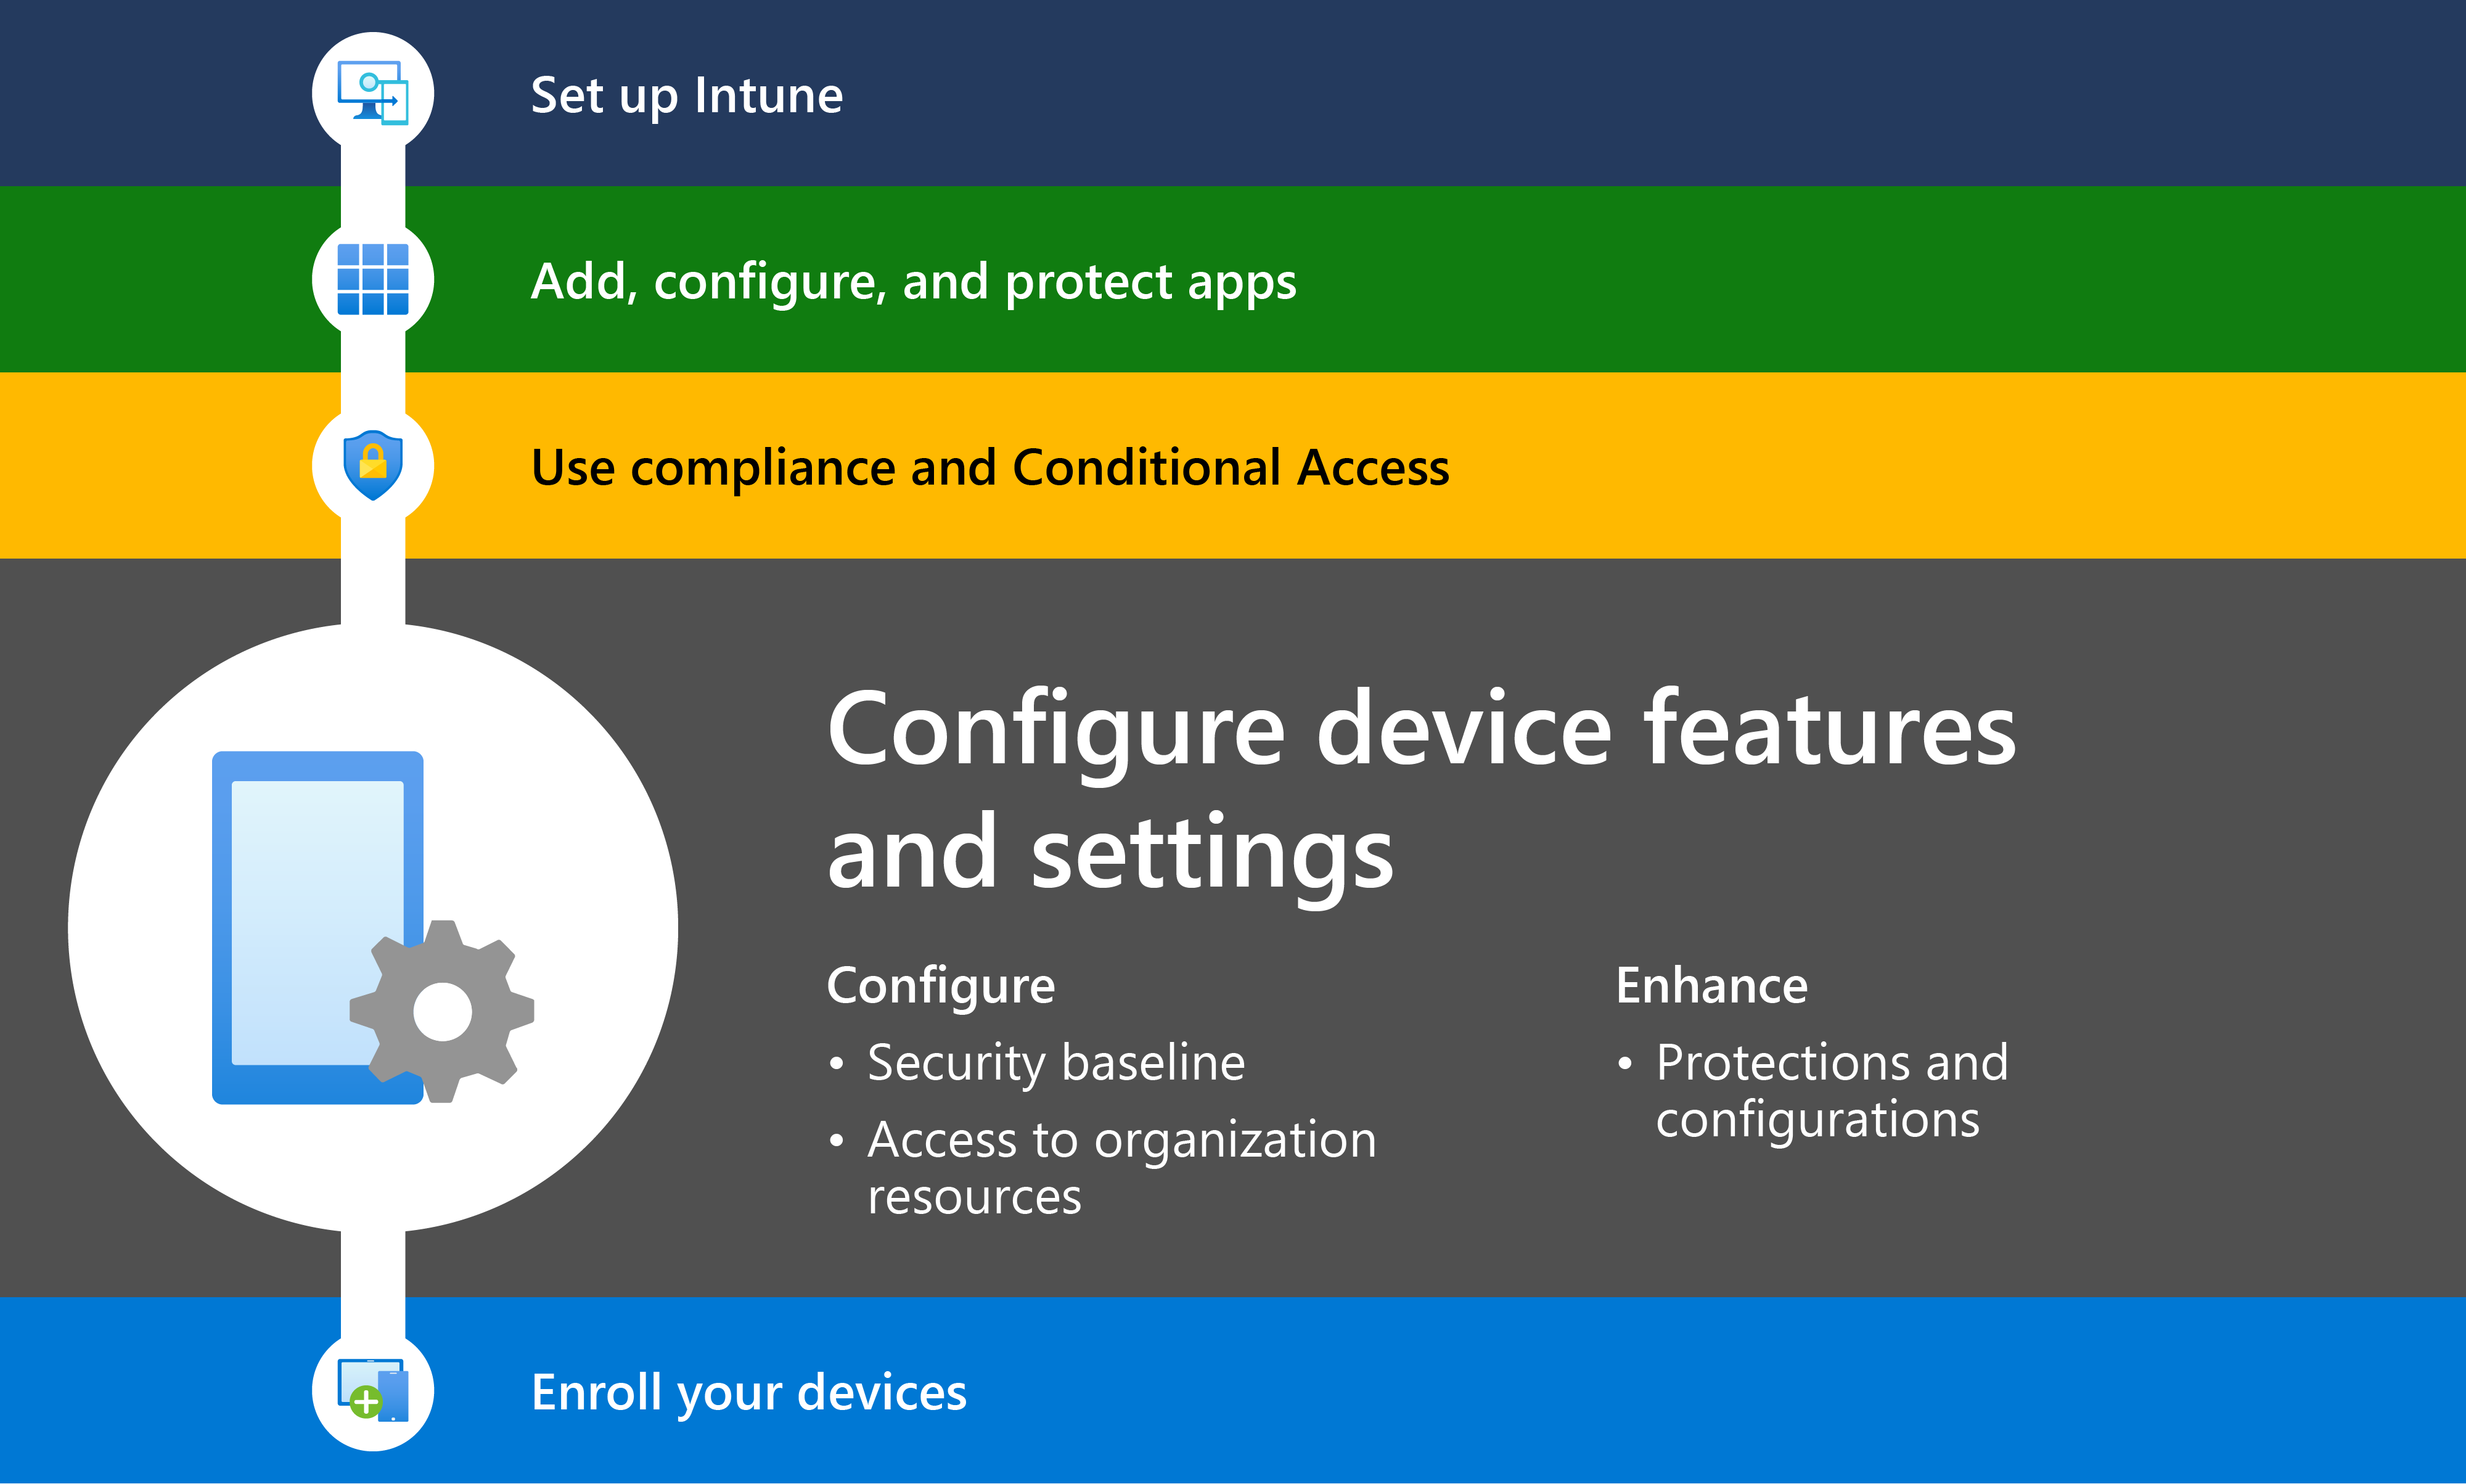 Diagram that shows getting started with Microsoft Intune with step 4, which is configuring devices features and security settings.